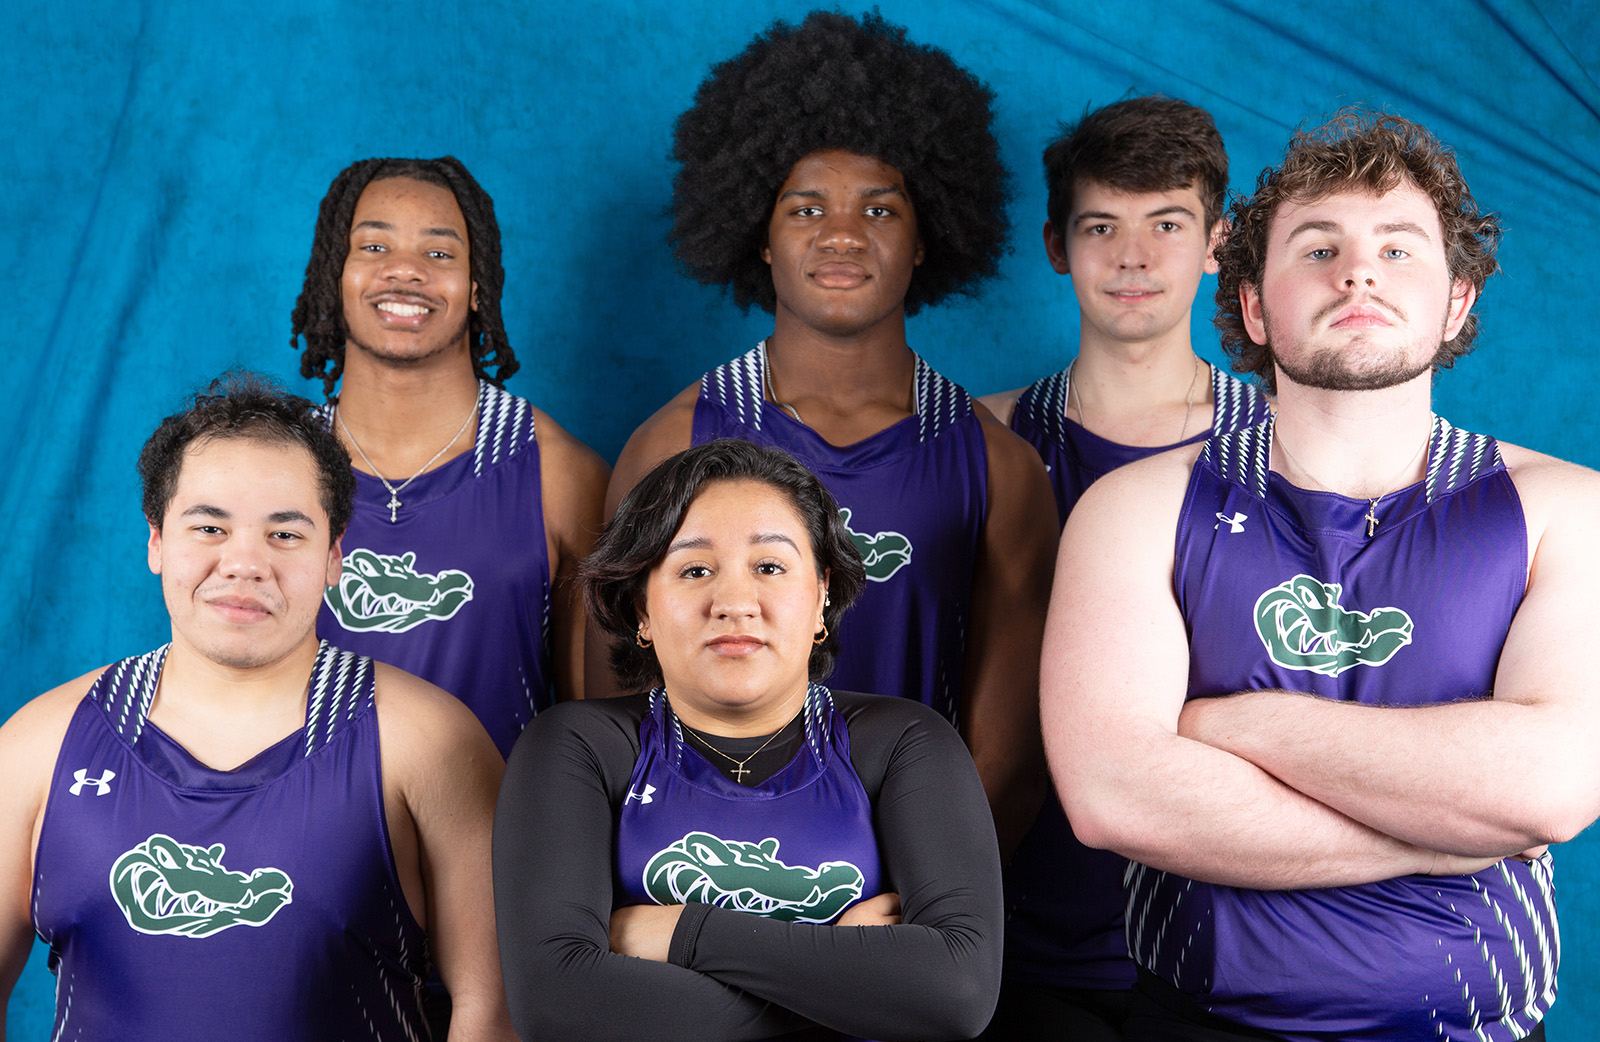 Track and field team photo